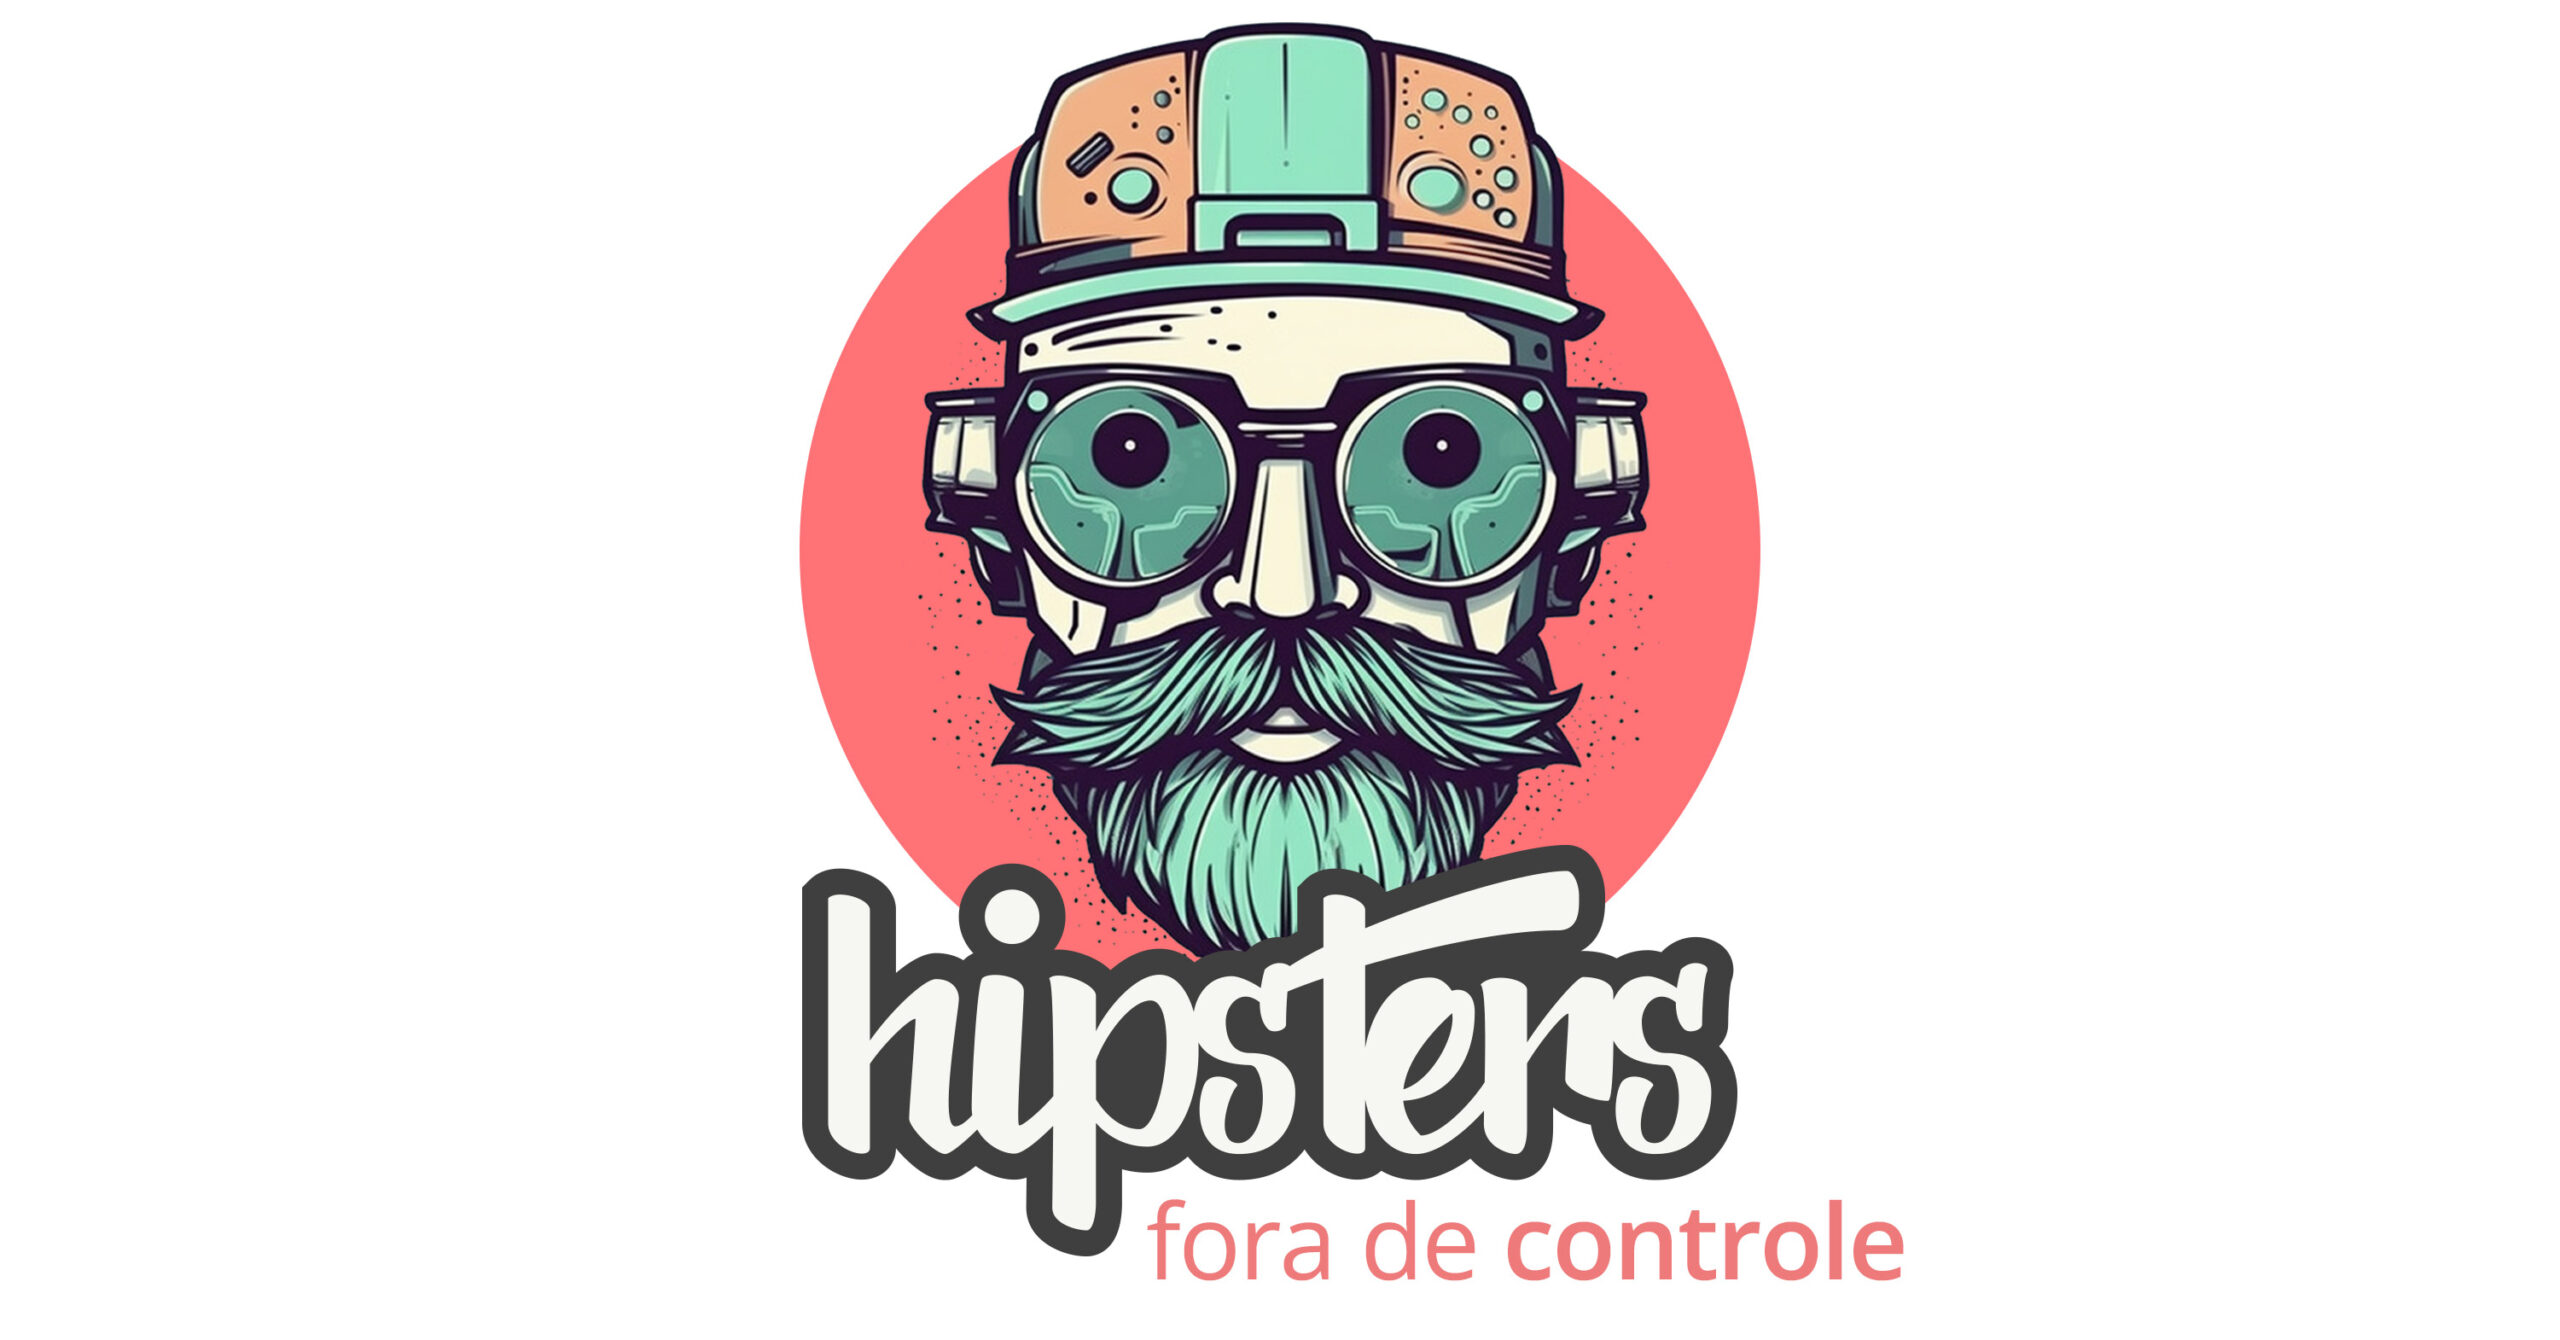  Hipsters